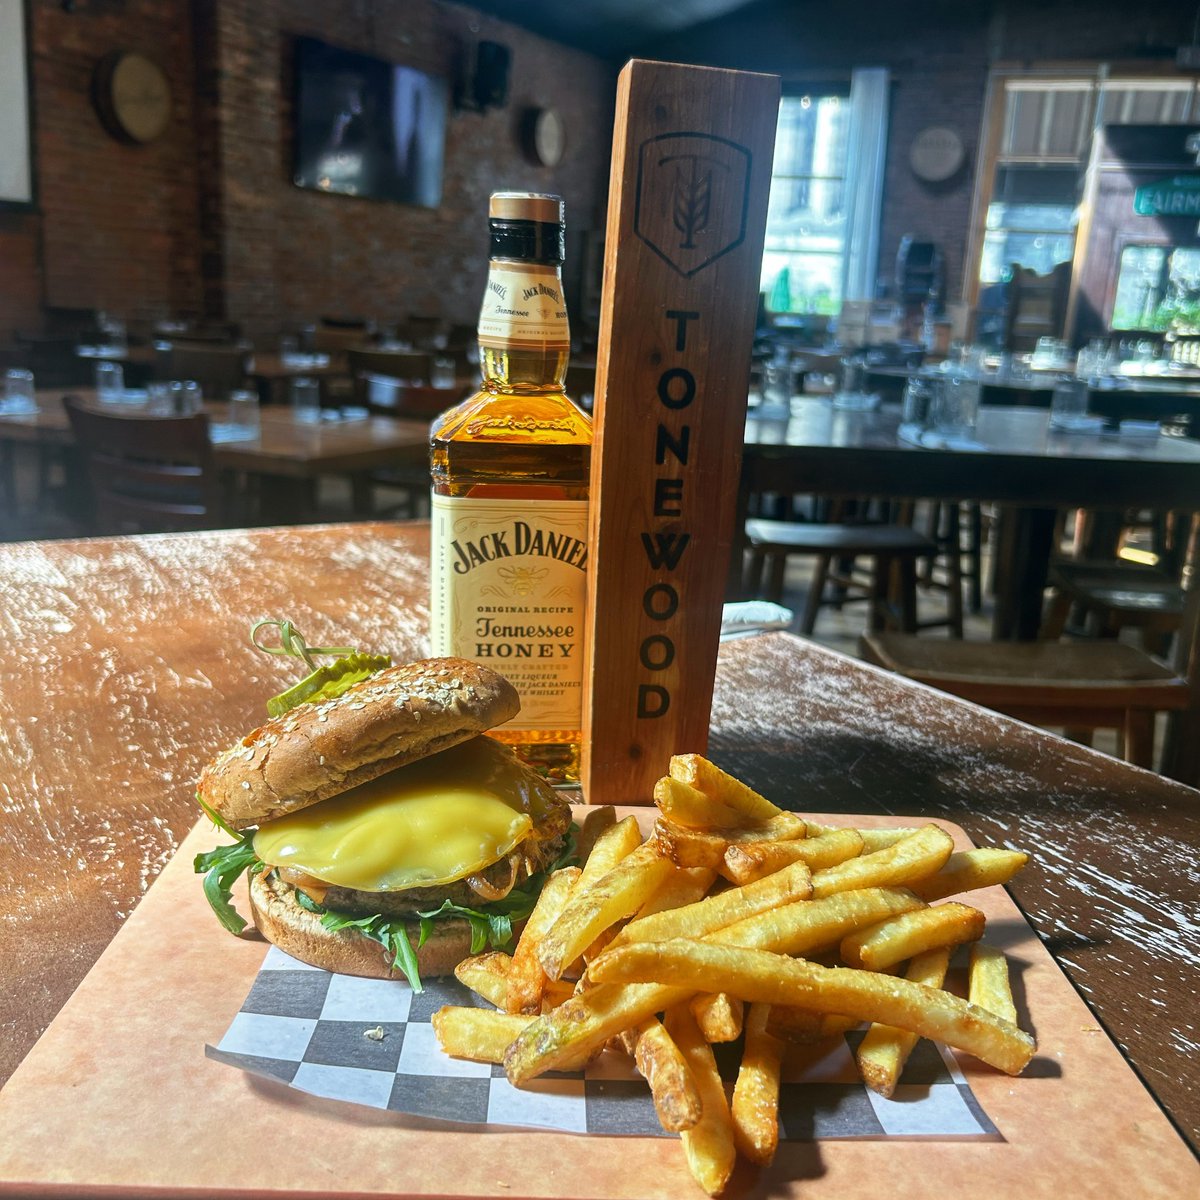 🚨 Every Tuesday… A burger, a beer & a whiskey - all for just $20! Tonight: 🍔 𝐀 𝐁𝐮𝐫𝐠𝐞𝐫 - Smoked Gouda, Beer Mustard, Caramelized Onions, Arugula, Whole Grain Kaiser Roll 🍺 𝐀 𝐁𝐞𝐞𝐫 - Tonewood Freshies 🥃 𝐀 𝐖𝐡𝐢𝐬𝐤𝐞𝐲 - Jack Daniel’s Honey #urbansaloon